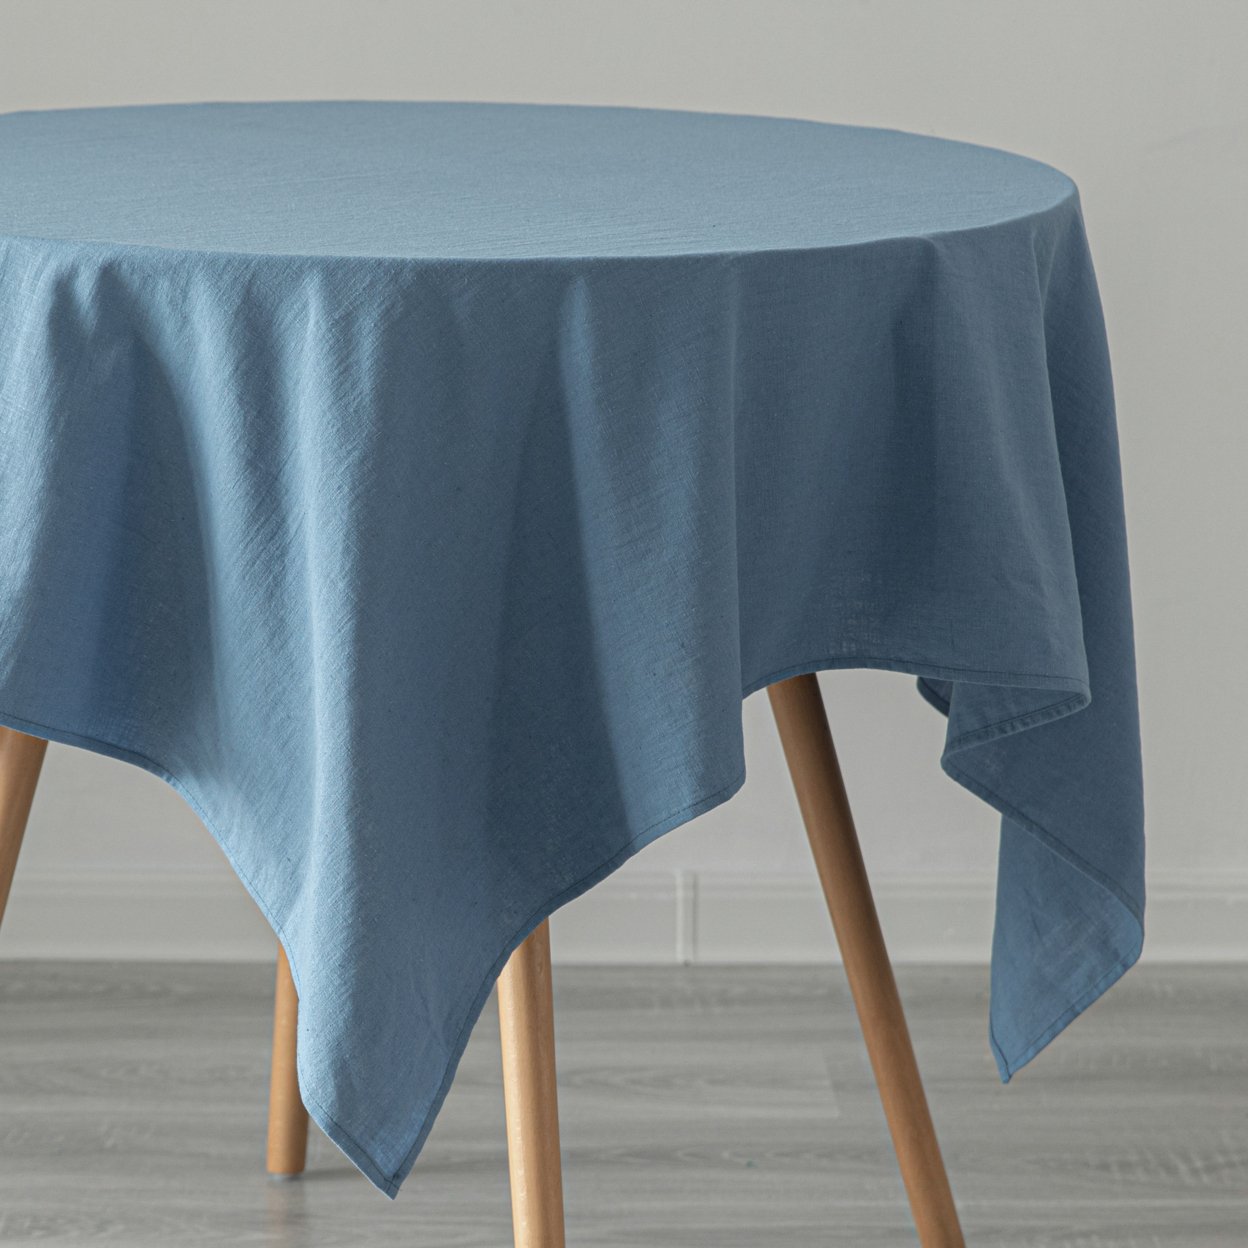 Deerlux 100 Percent Pure Linen Washable Tablecloth Solid Color - 52 X 70 In. Blue